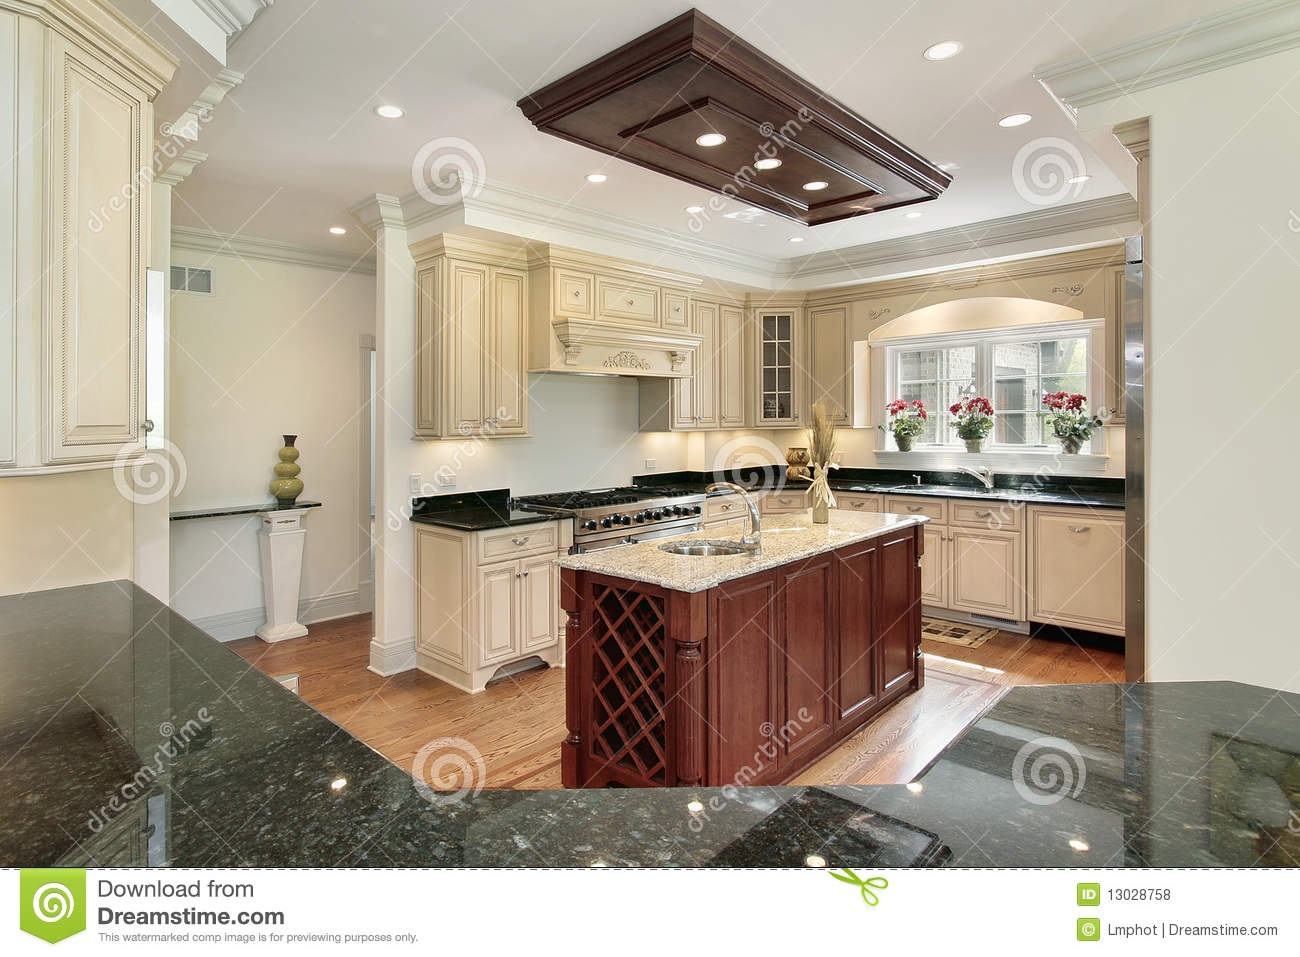 Kitchen With Center Island Royalty Free Stock Photos   Image  13028758